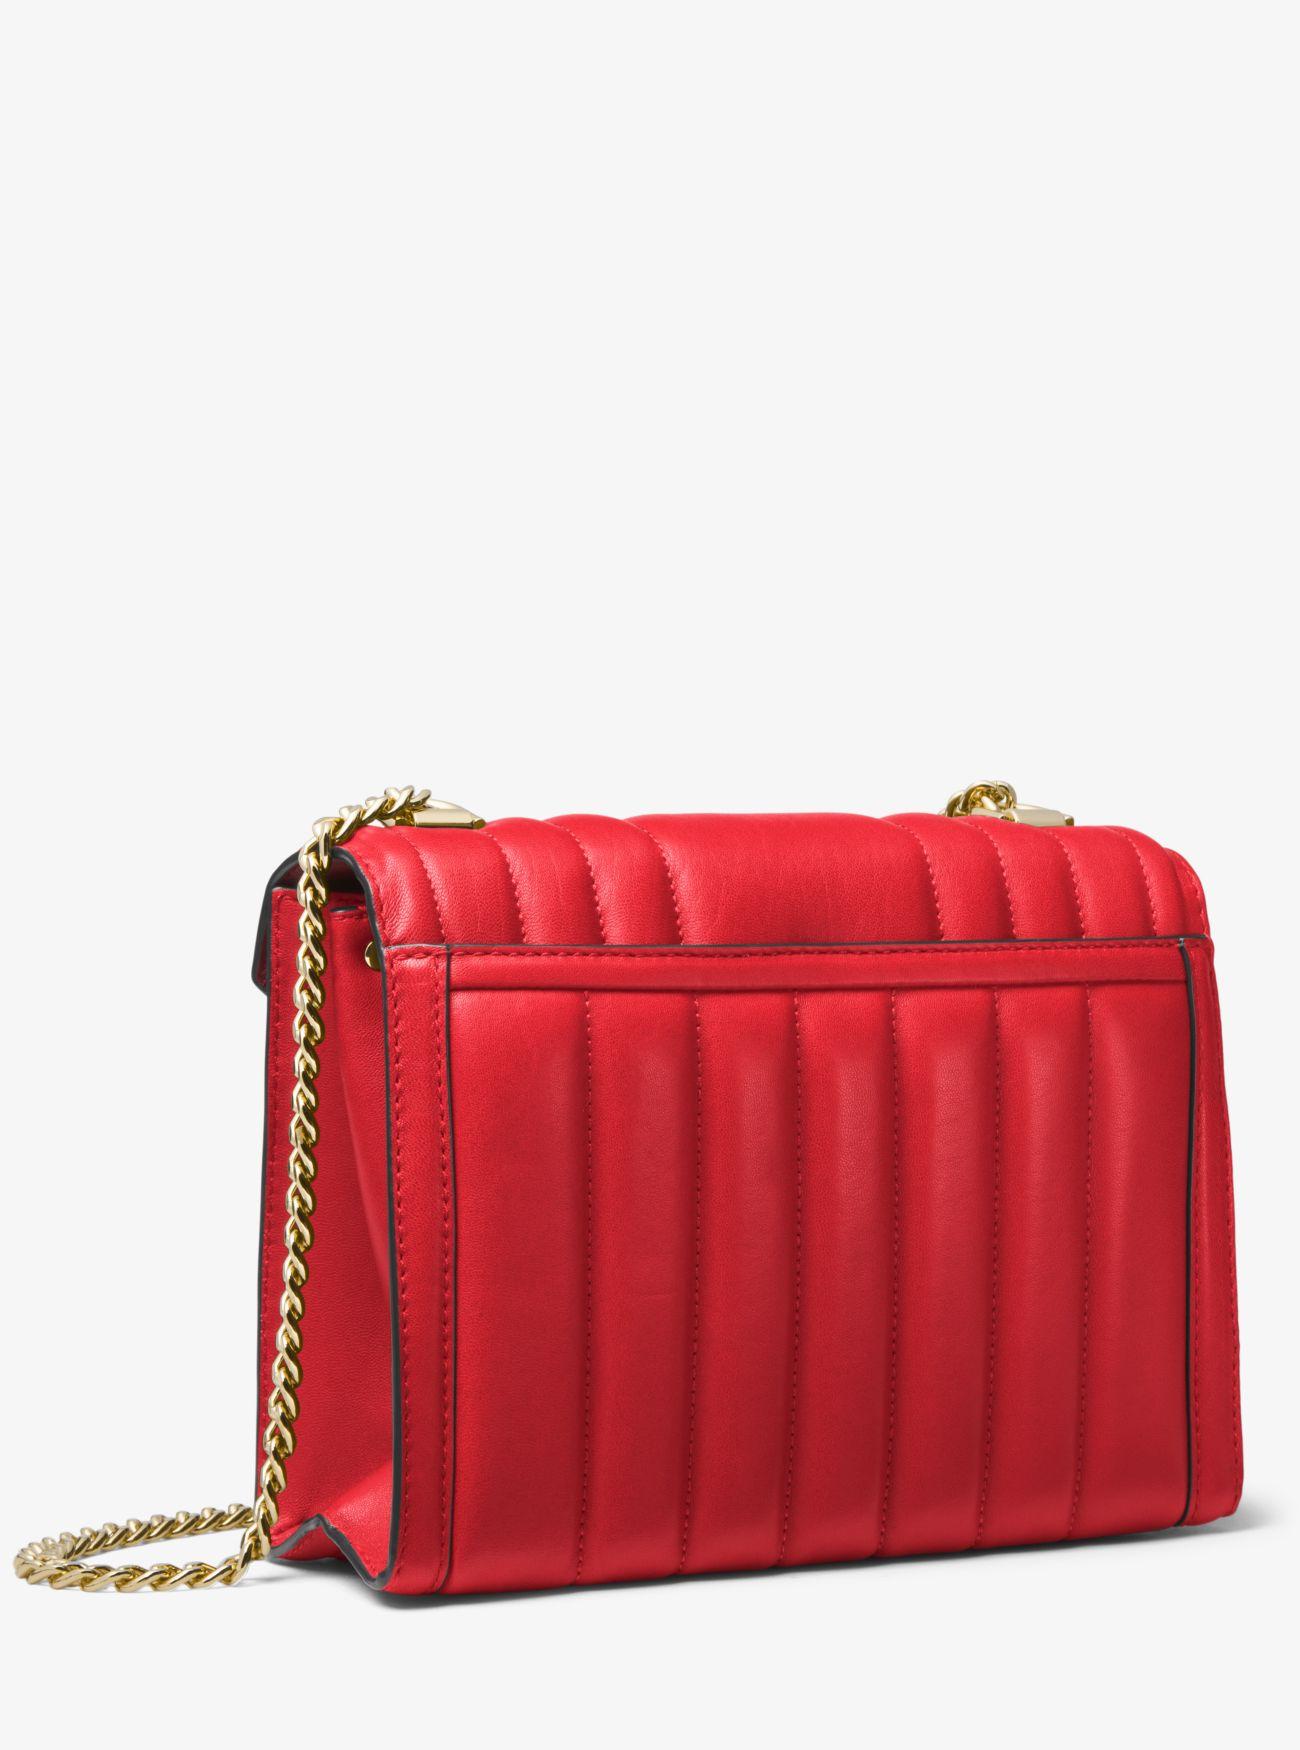 MICHAEL Michael Kors Whitney Large Quilted Leather Convertible Shoulder Bag in Red - Lyst